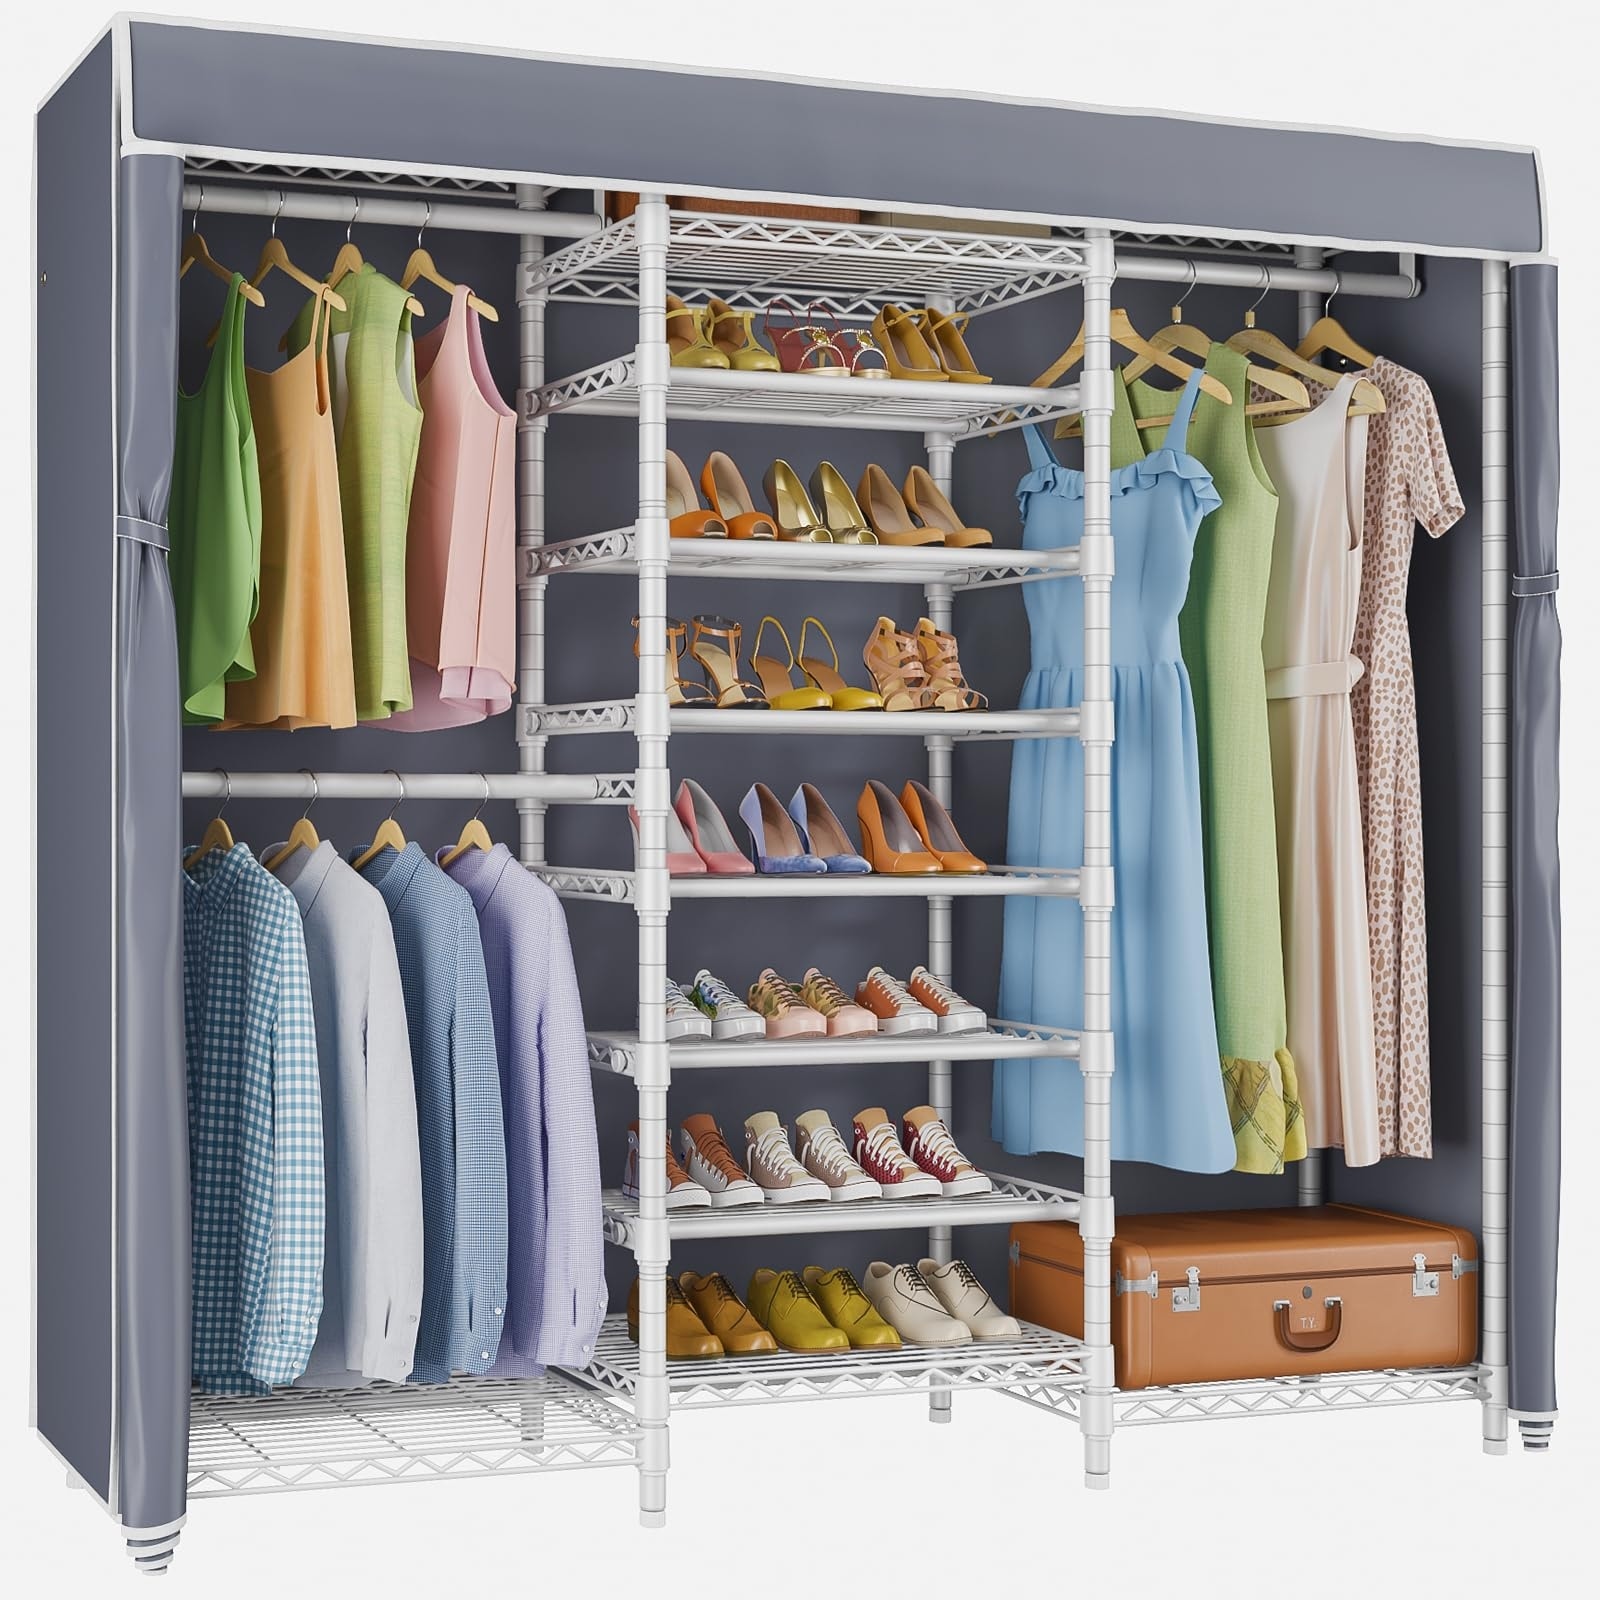 https://ak1.ostkcdn.com/images/products/is/images/direct/6b54833080cbe59114dd124f5028d73eceb9d099/Portable-Closet%2C-Adjustable-Rack-Wire-Shelf%2C-Large-Wardrobe-Organizer%2C-Free-Standing-Clothes-Rack-with-Hanging-Rod.jpg